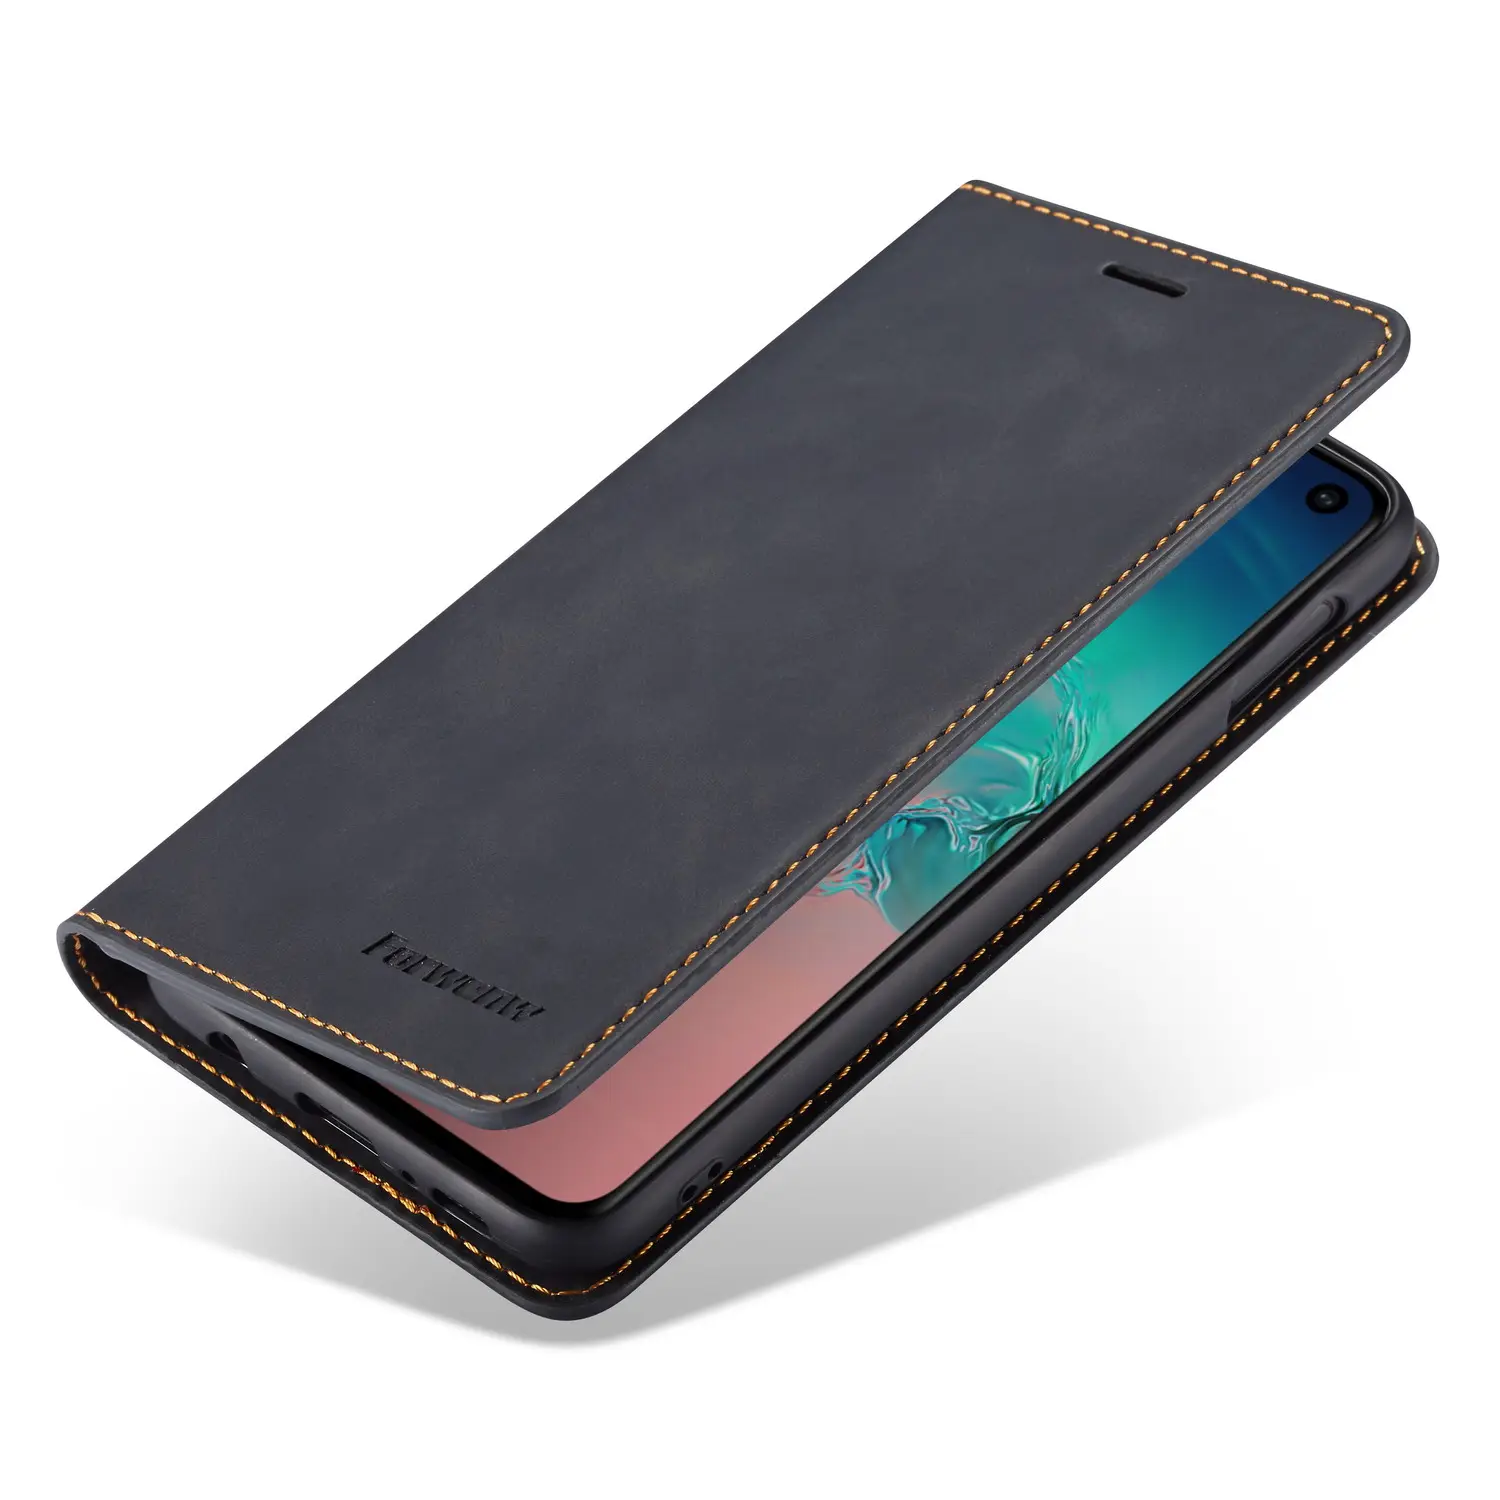 Pu leather wallet Phone Cases For Samsung S20 Book Flip Wallet Phone Case Cover with Card Slots Holders for samsung S20 Plus